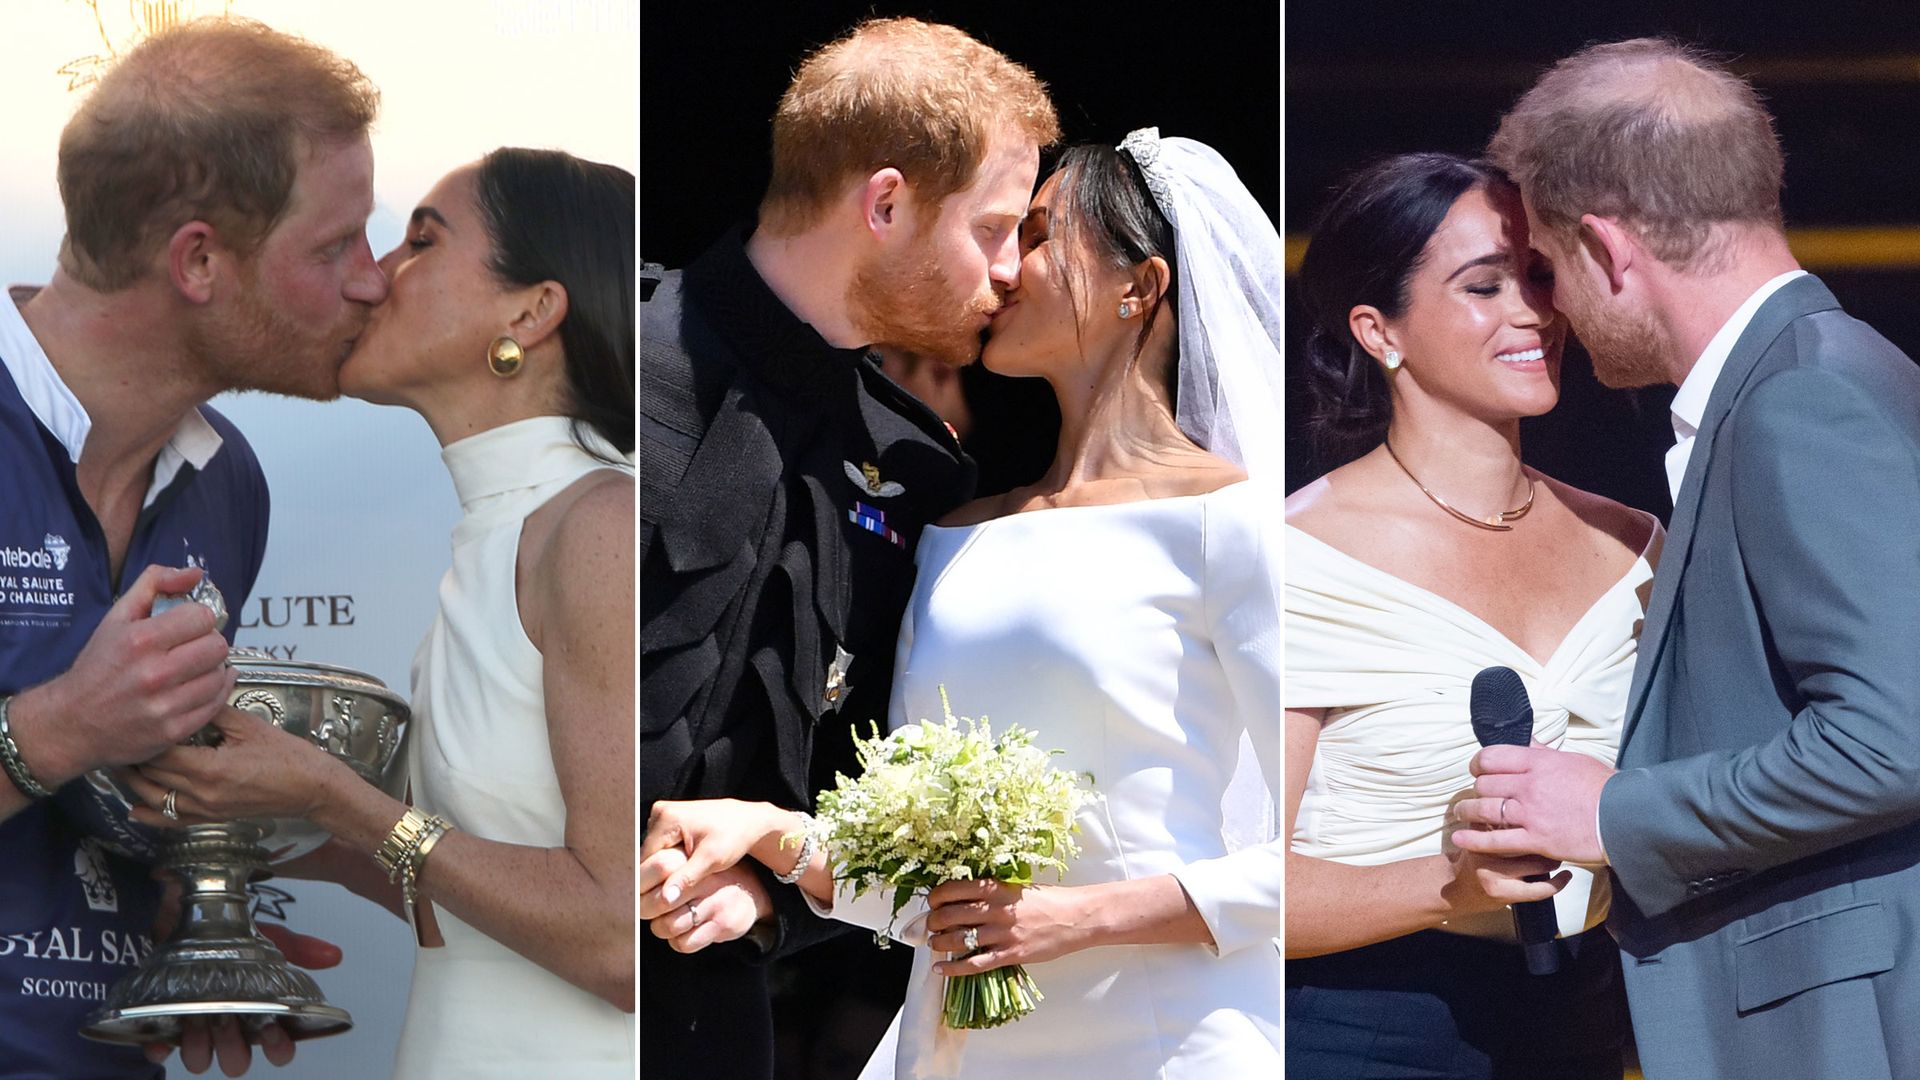 Prince Harry and Meghan Markle's best kisses in 7 sweet photos